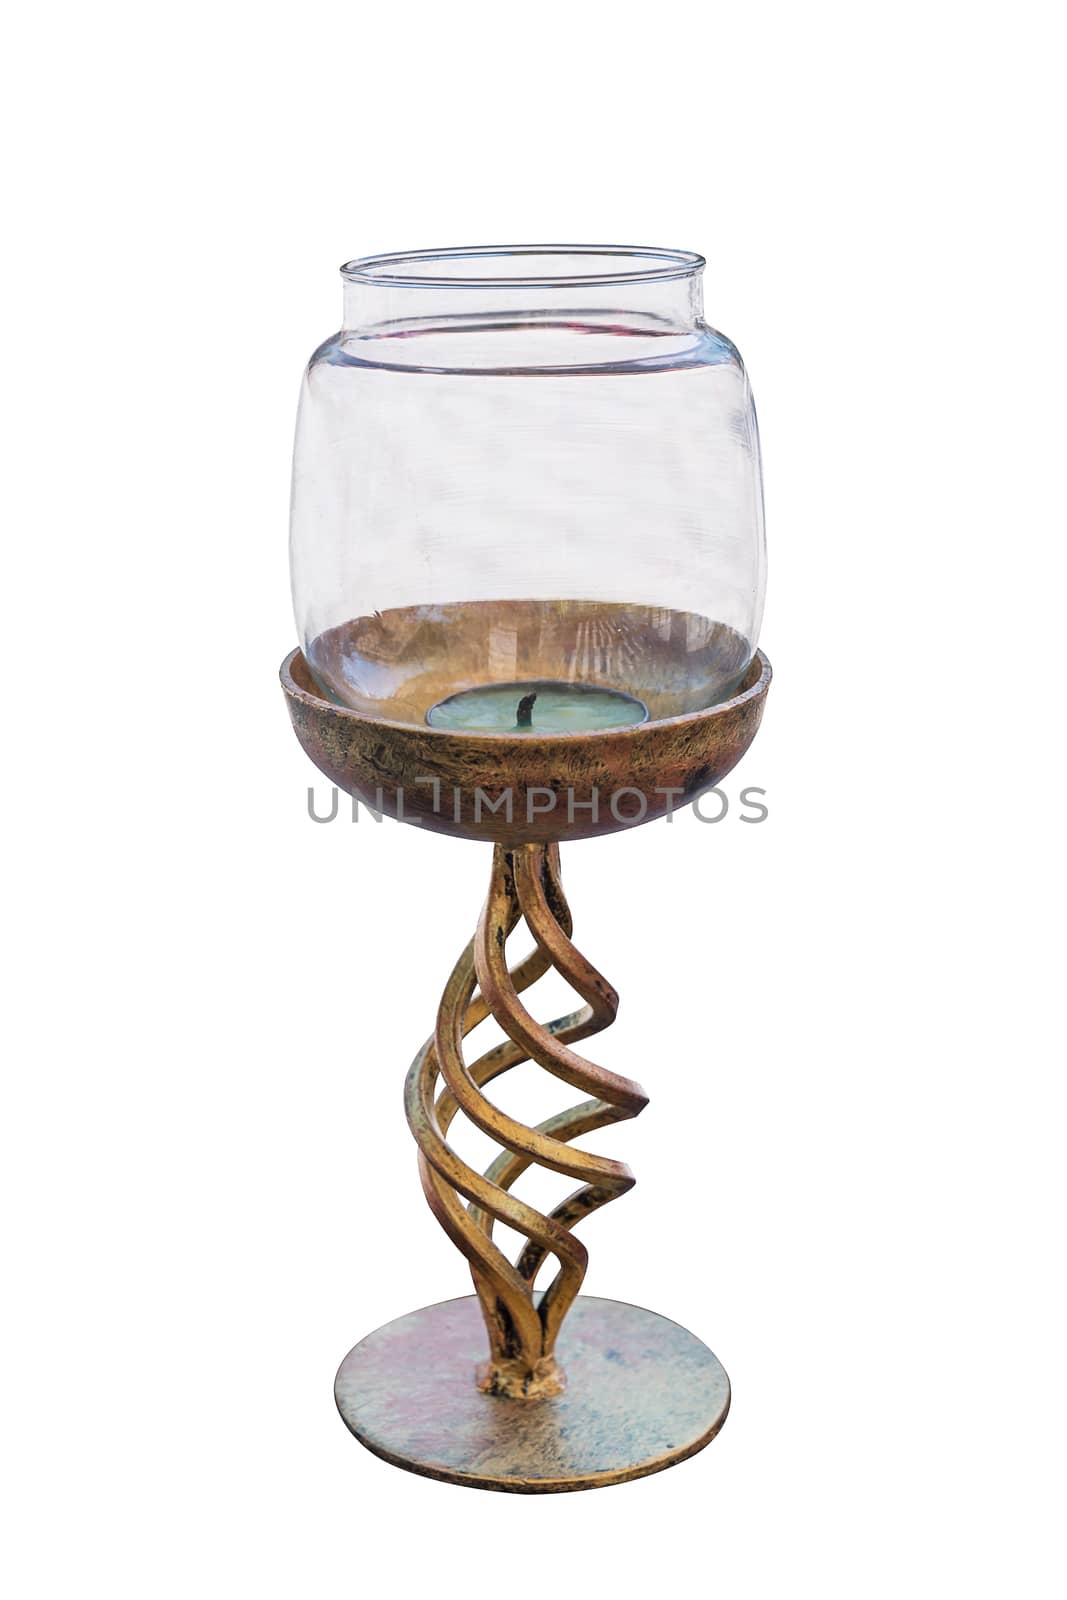 Old metal brass candlestick with glass cover isolated on white background work with clipping path.